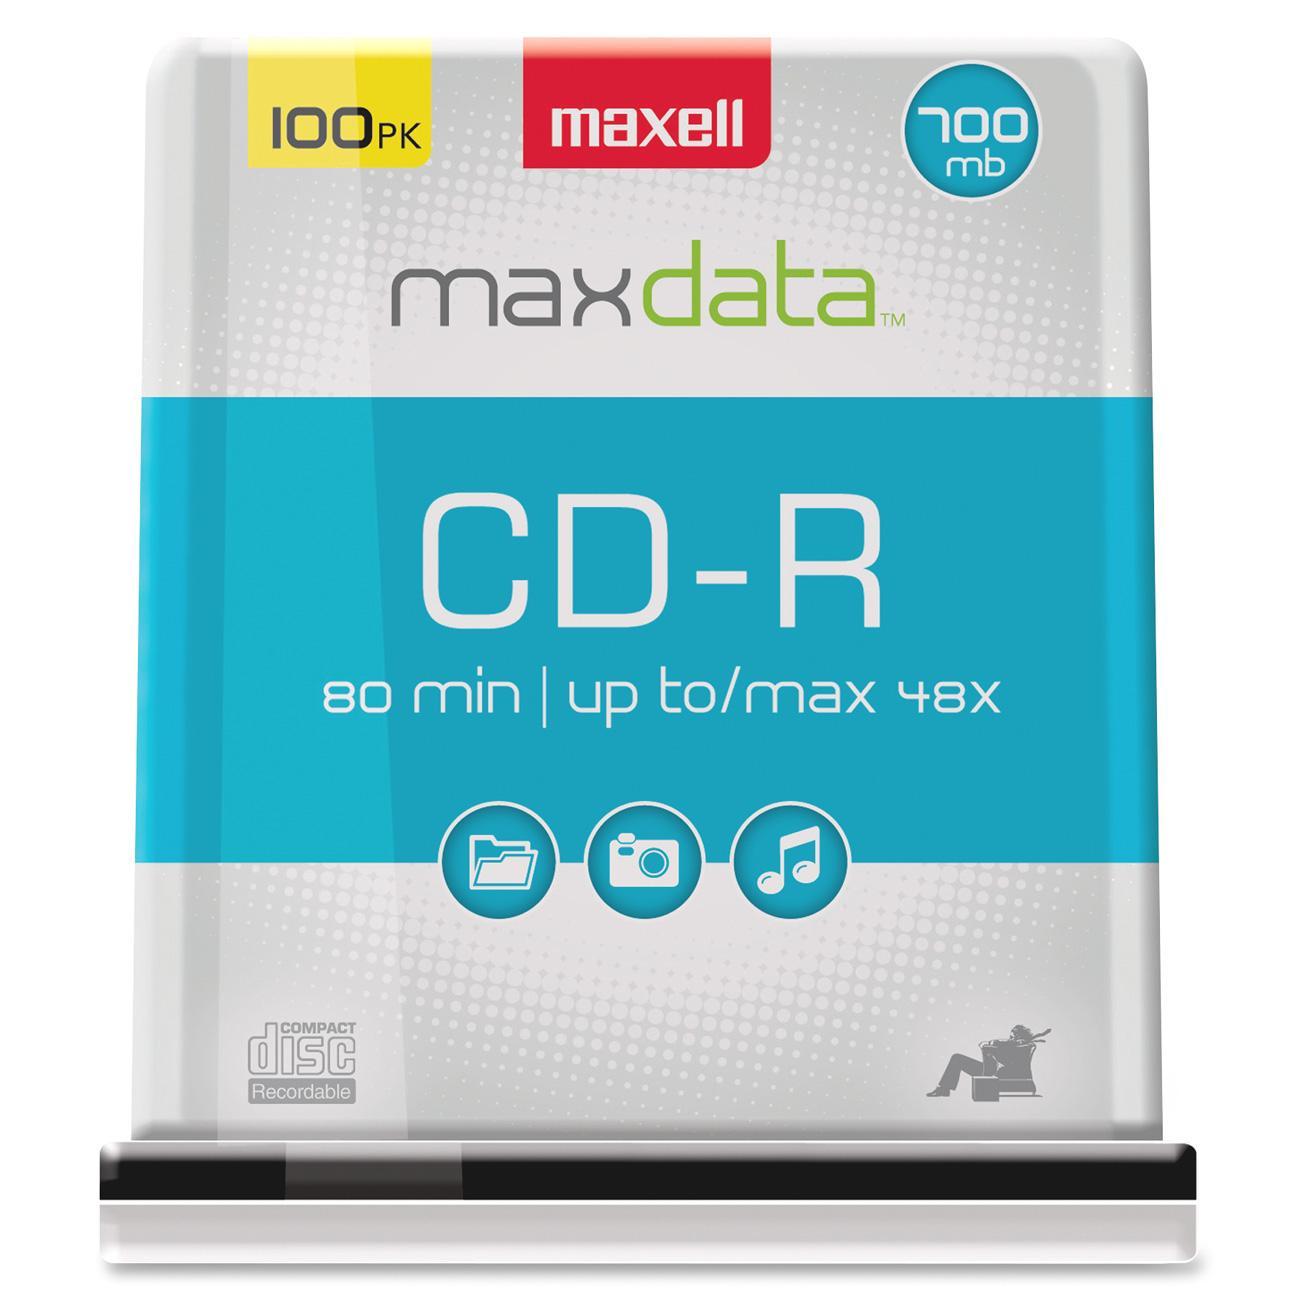 Maxell 648445 Cd-R Cd Recordable Discs 80Min 25 Pk by Maxell